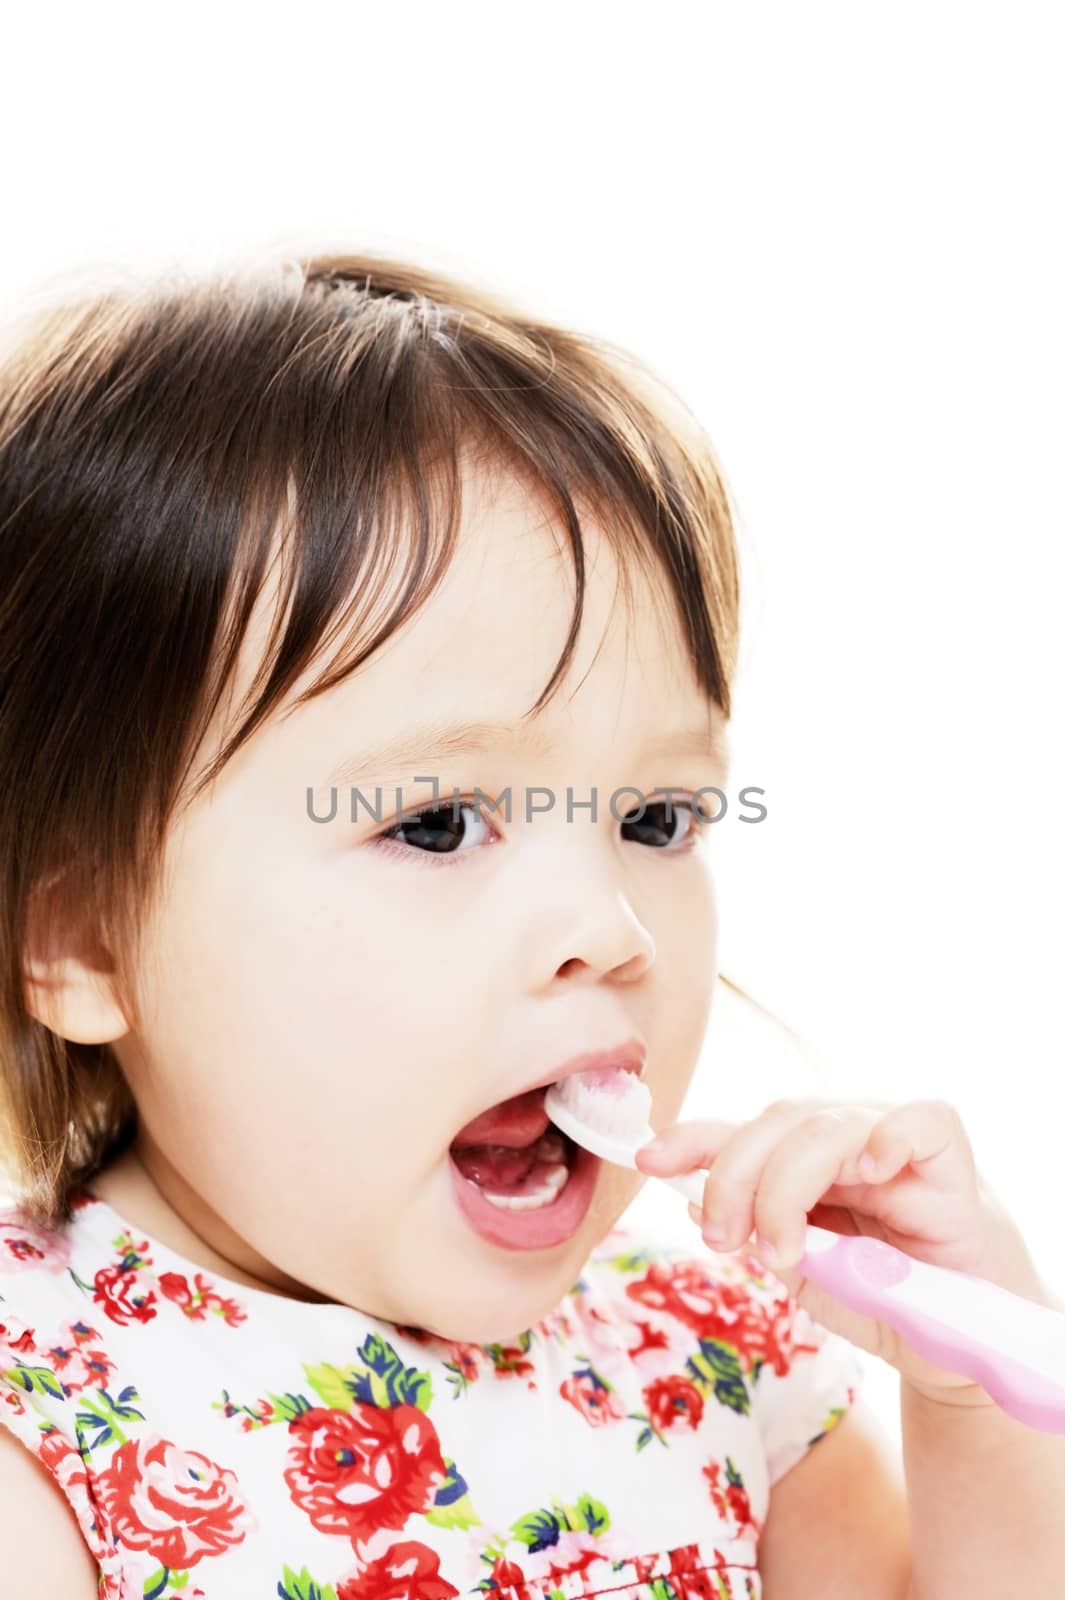 Child brushes teeth by kmwphotography